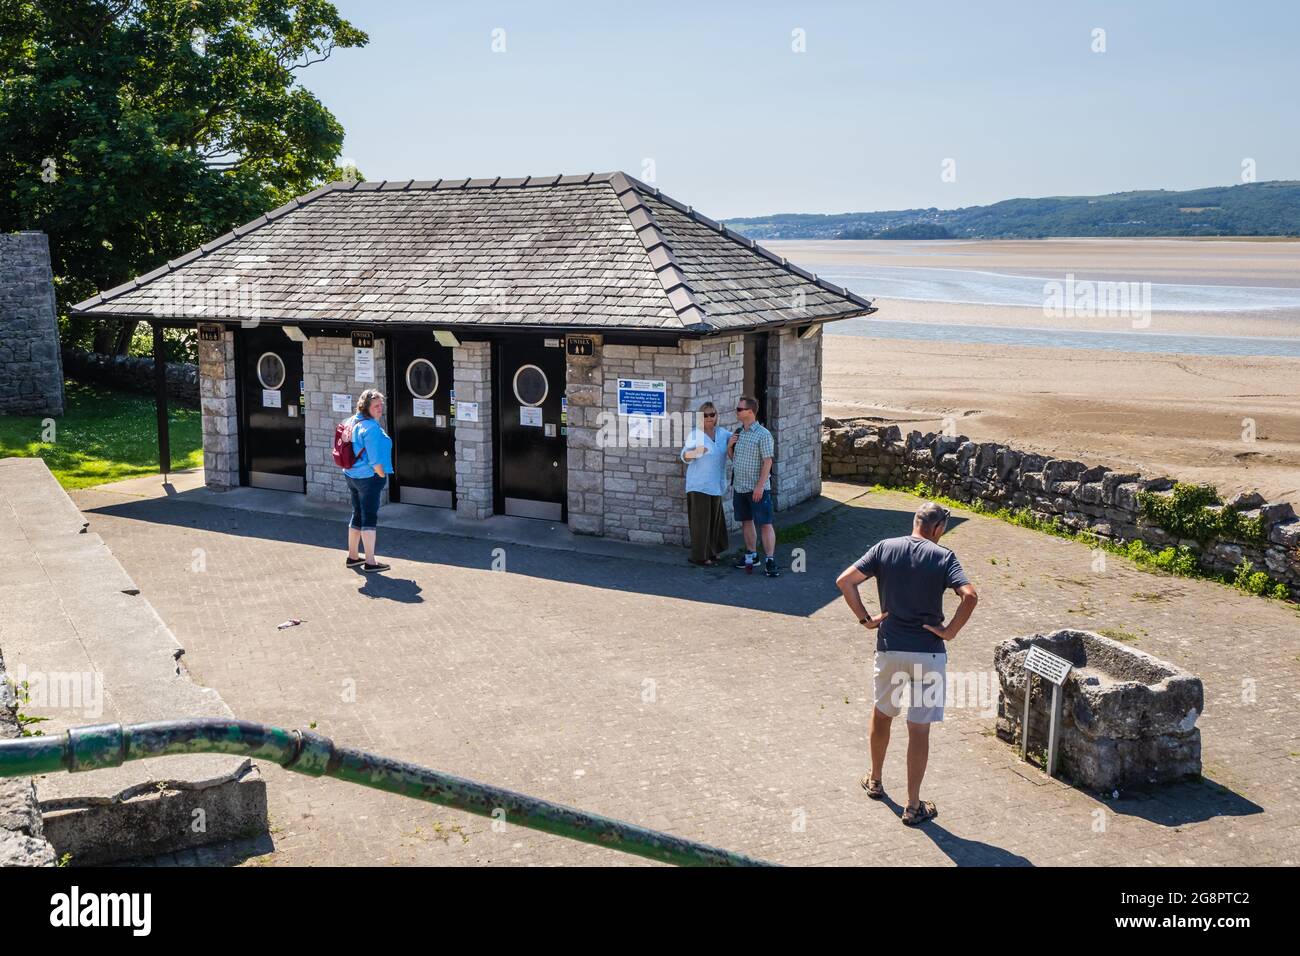 16.07.21 Arnside, Lancashire, UK People waiting to use public toilets in Arnside in Lancashire on a hot summers day Stock Photo